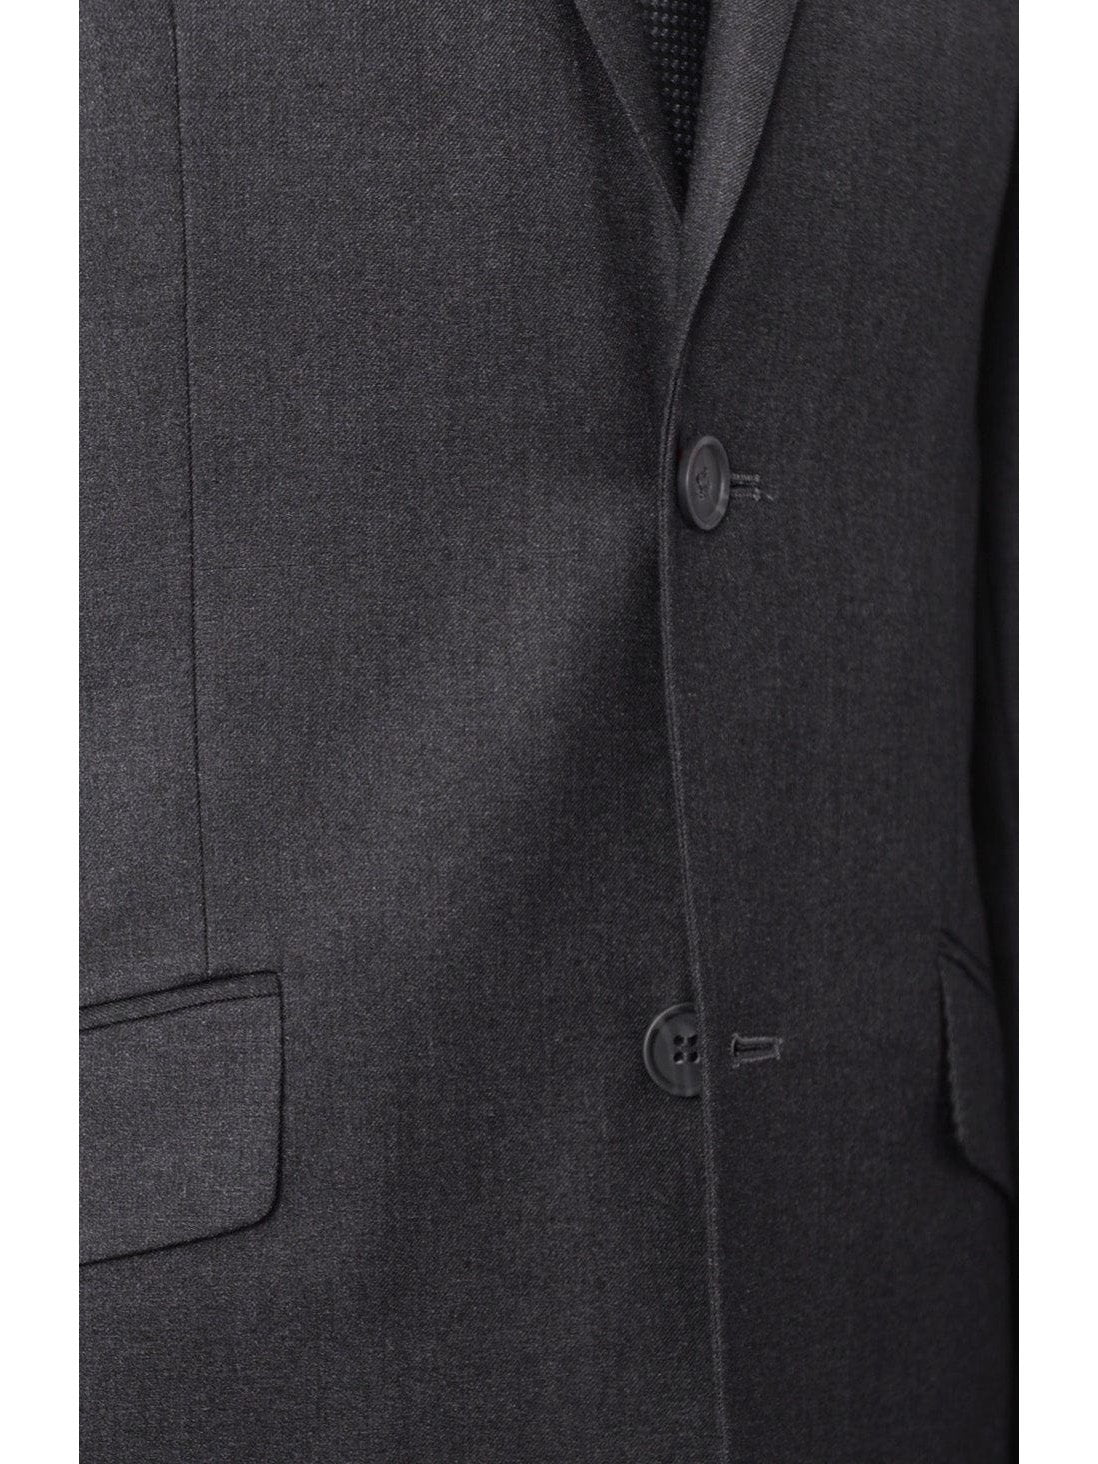 Raphael Bestselling Items Raphael Slim Fit Solid Medium Gray Two Button Suit